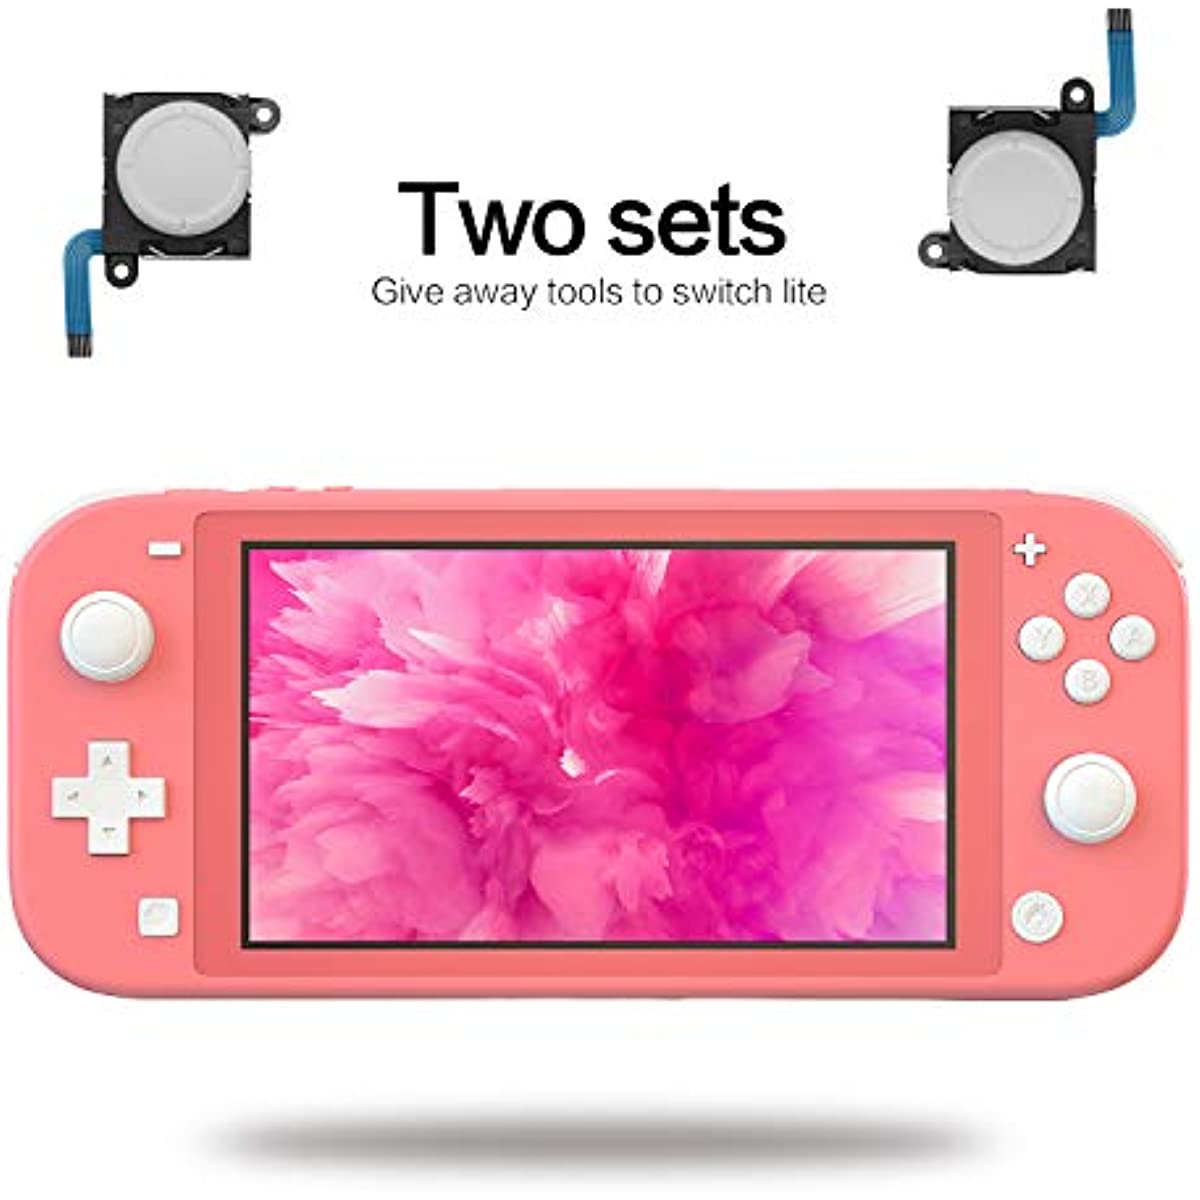 Replacement Joy Stick Compatible with Switch lite, Joystick Replacement Compatible with Switch lite and Repair Tool Kit for Switch lite - 2 Pack (White)